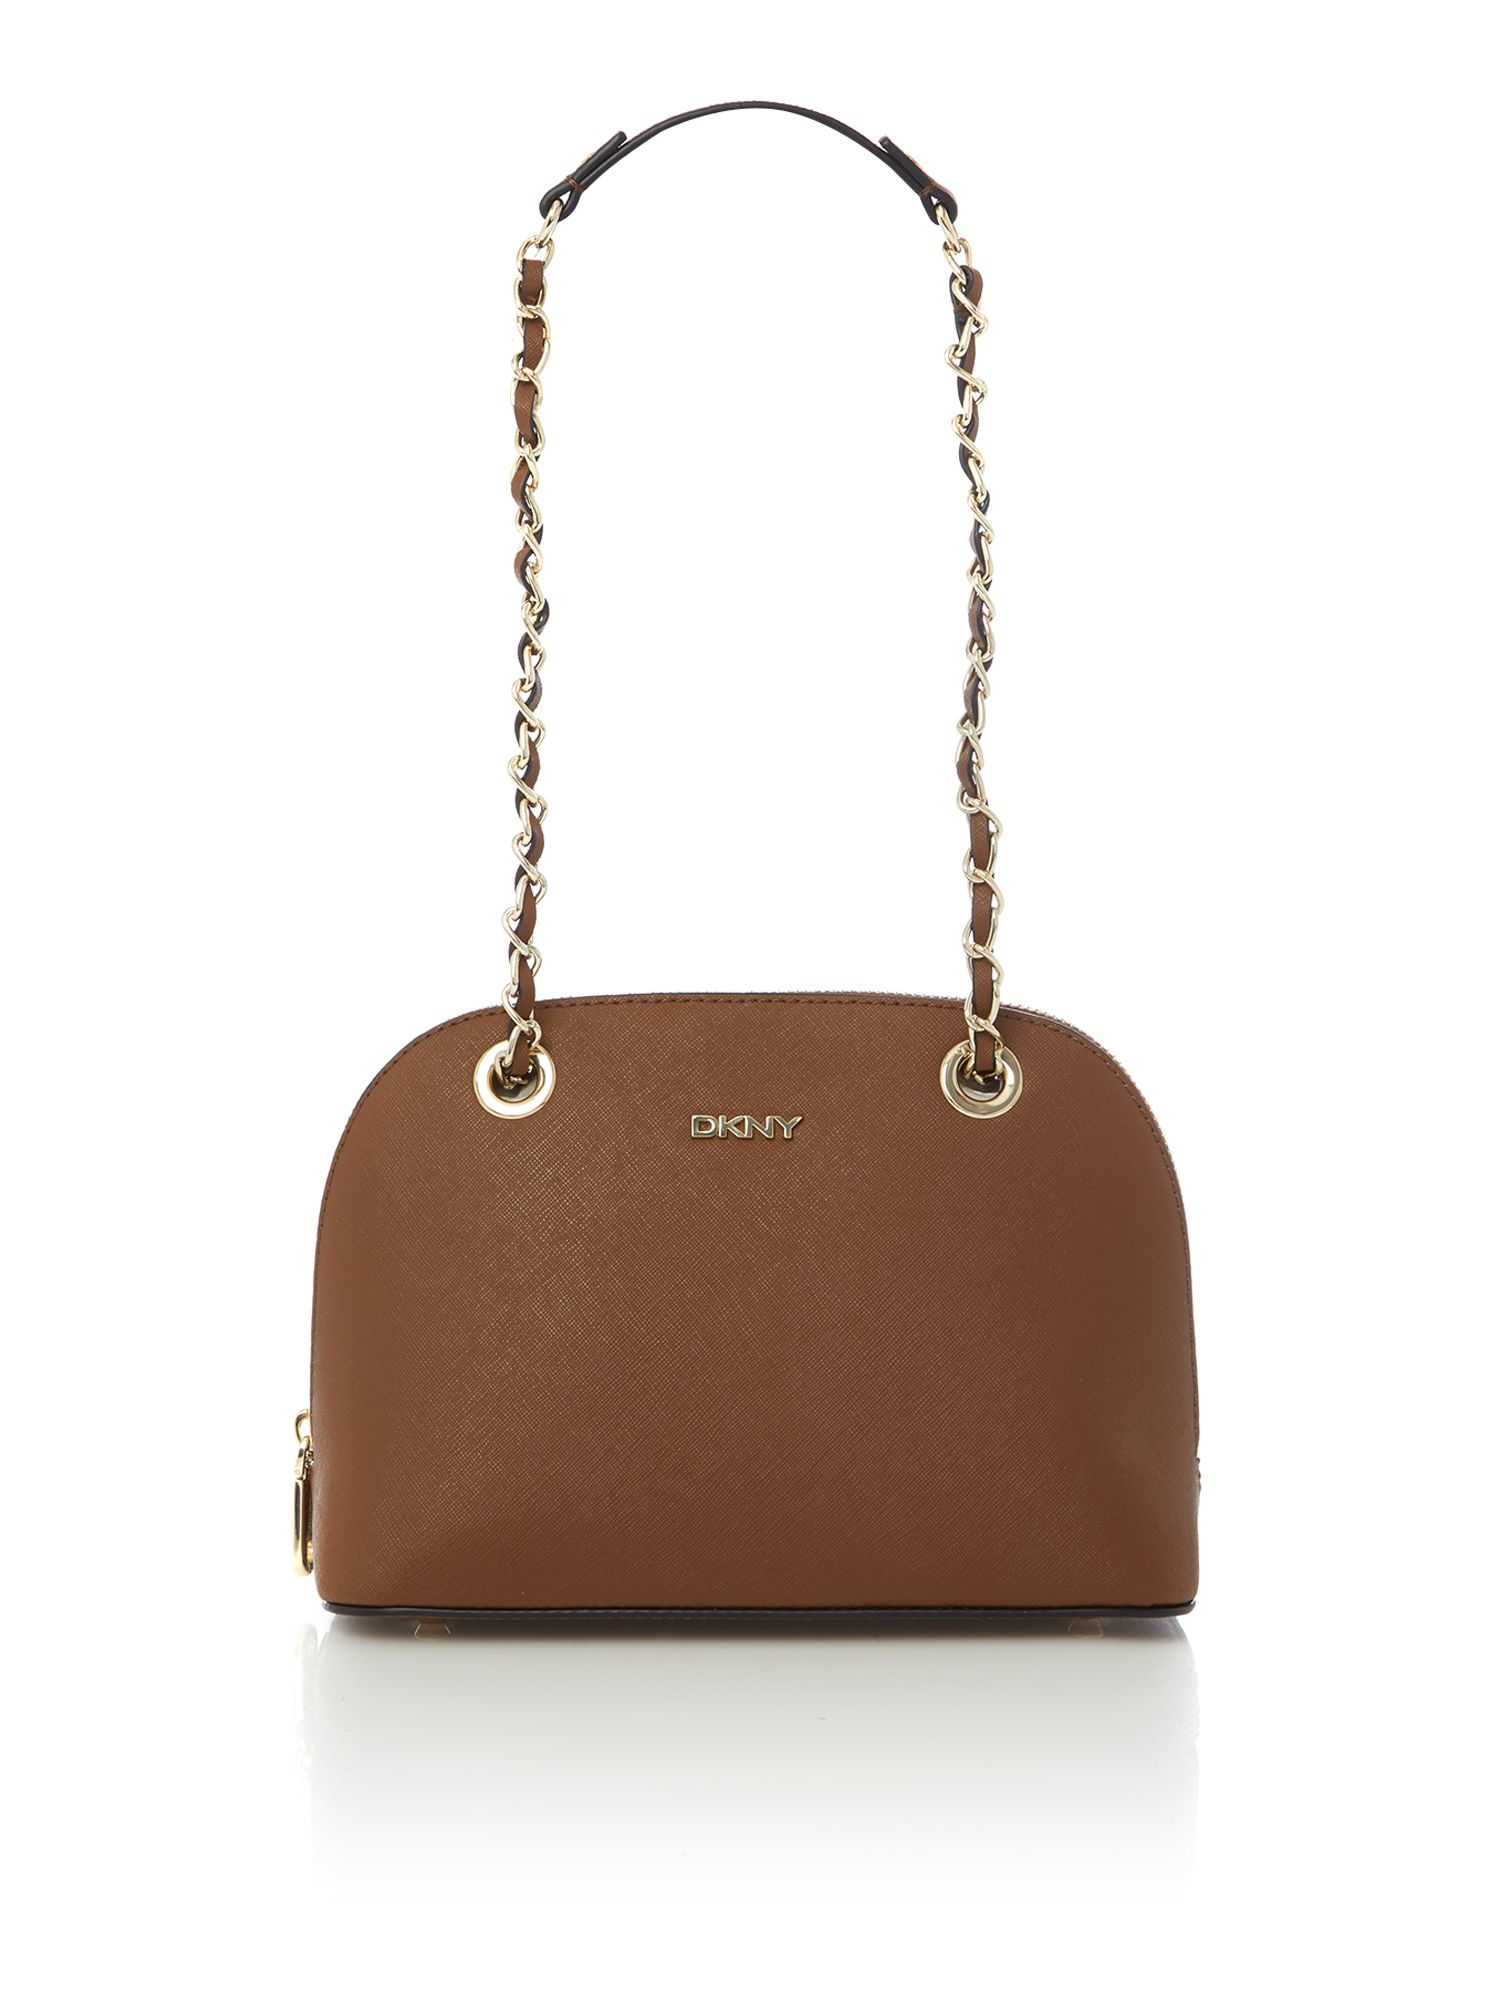 Dkny Saffiano Tan Small Rounded Cross Body Bag in Brown | Lyst